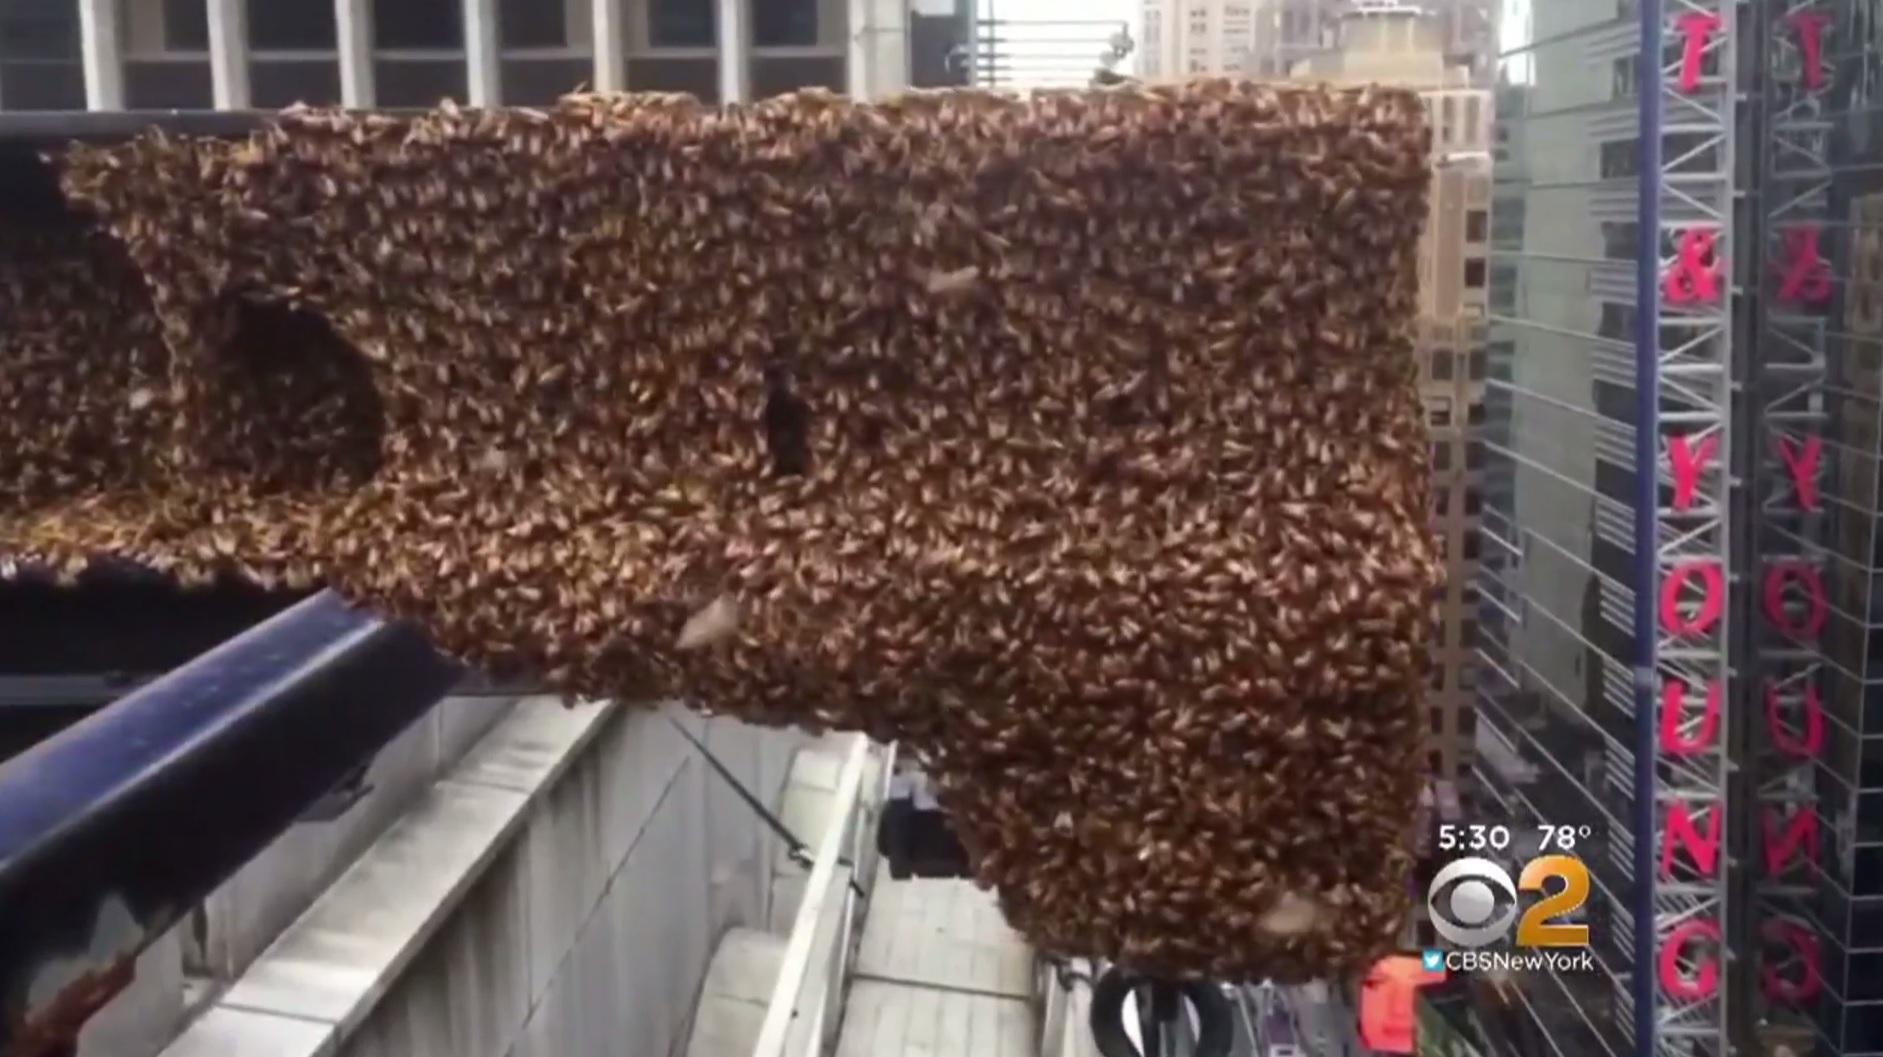 30,000 bees swarm ledge high atop Times Square CBS News